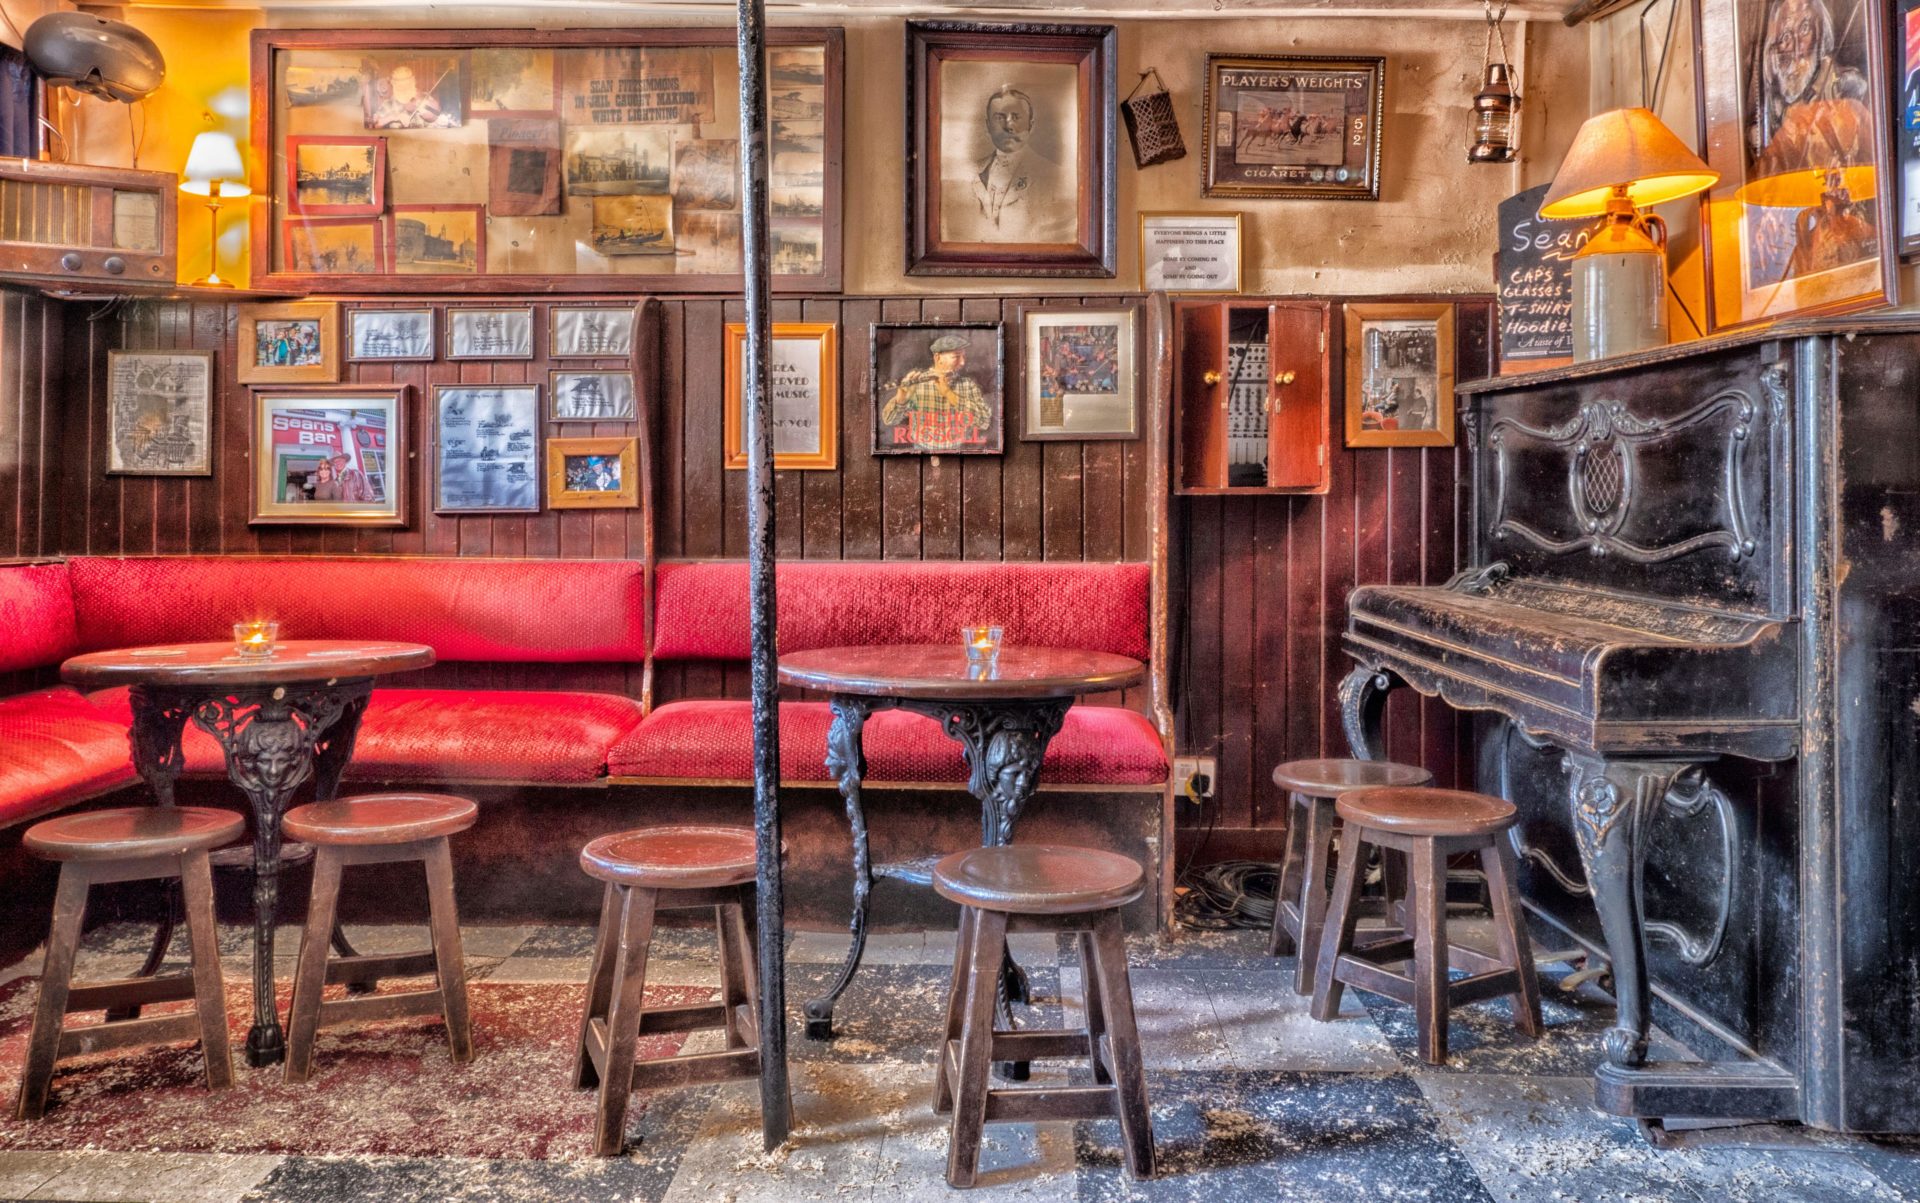 Interior view of Sean's Bar in Athlone, County Westmeath